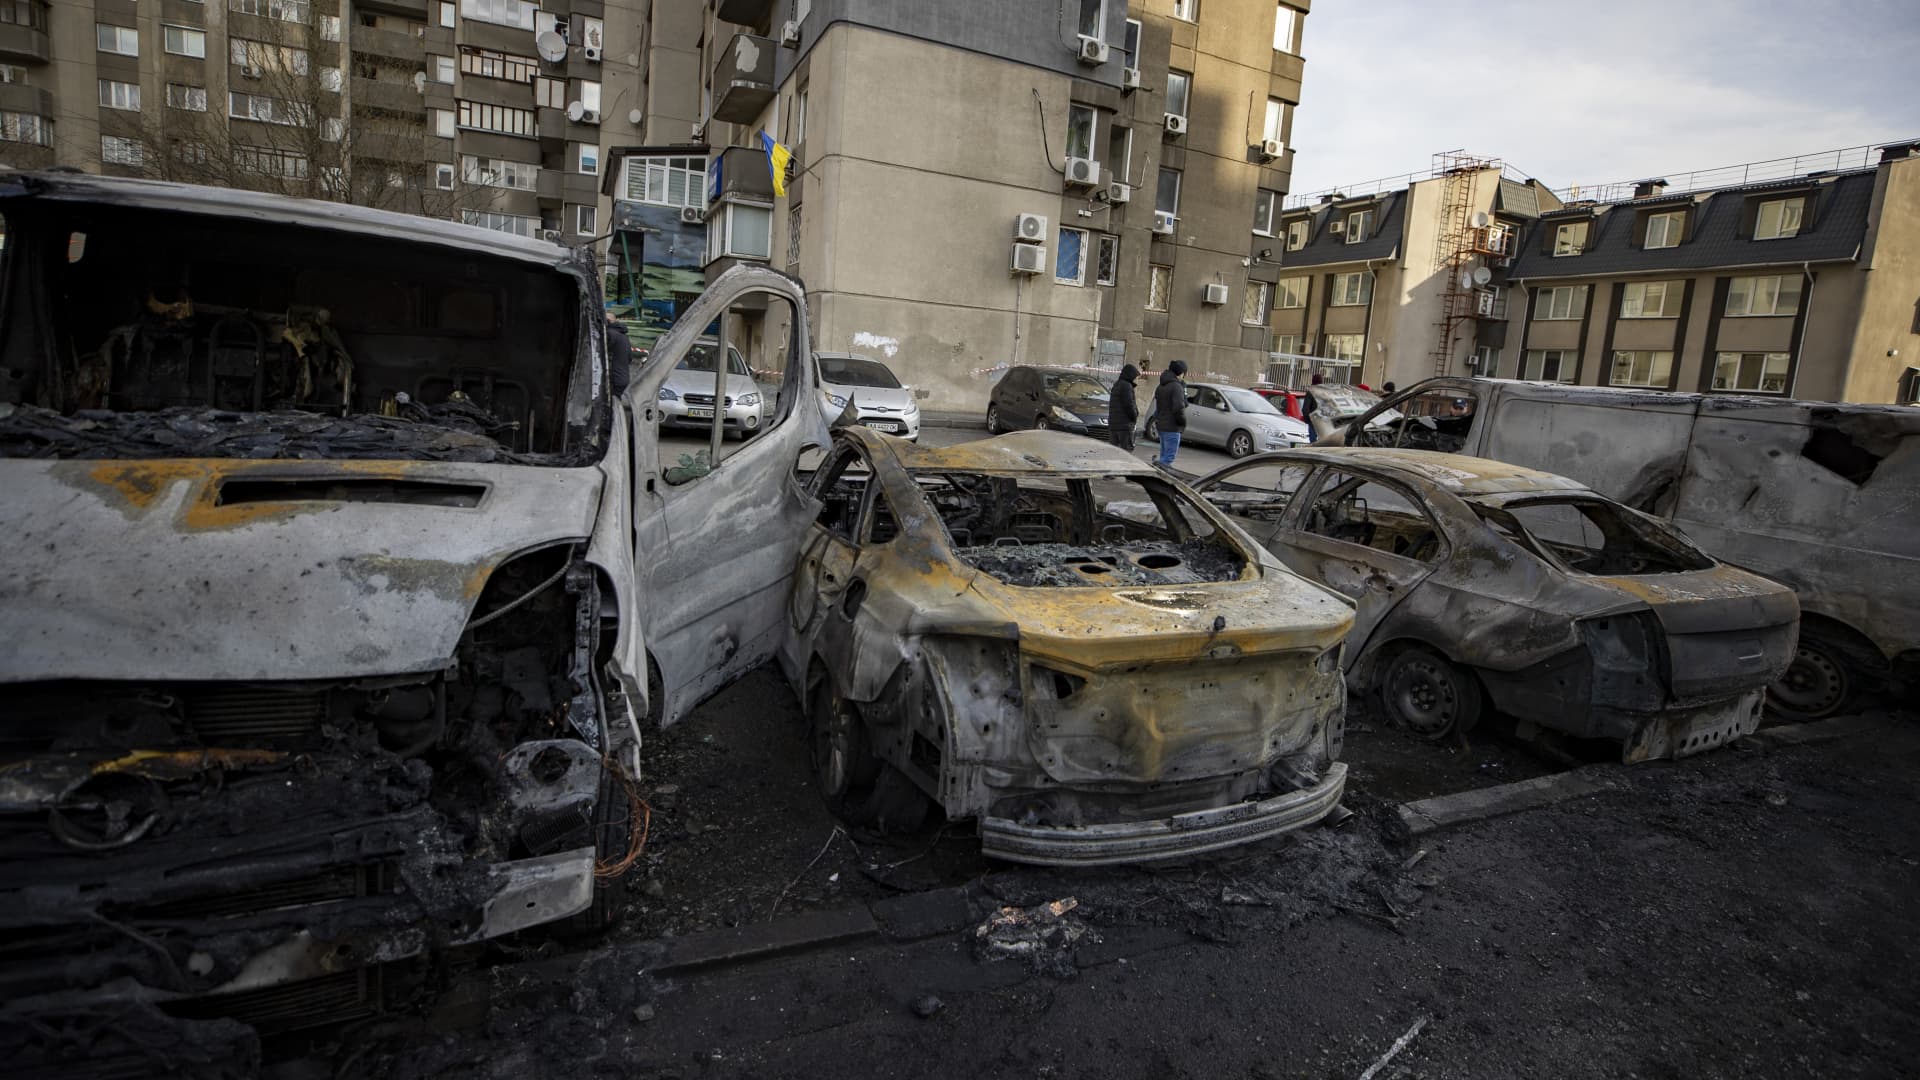 A view of a site after explosions in Ukraine's capital Kyiv on March 9, 2023. Many vehicles were damaged by the explosions.